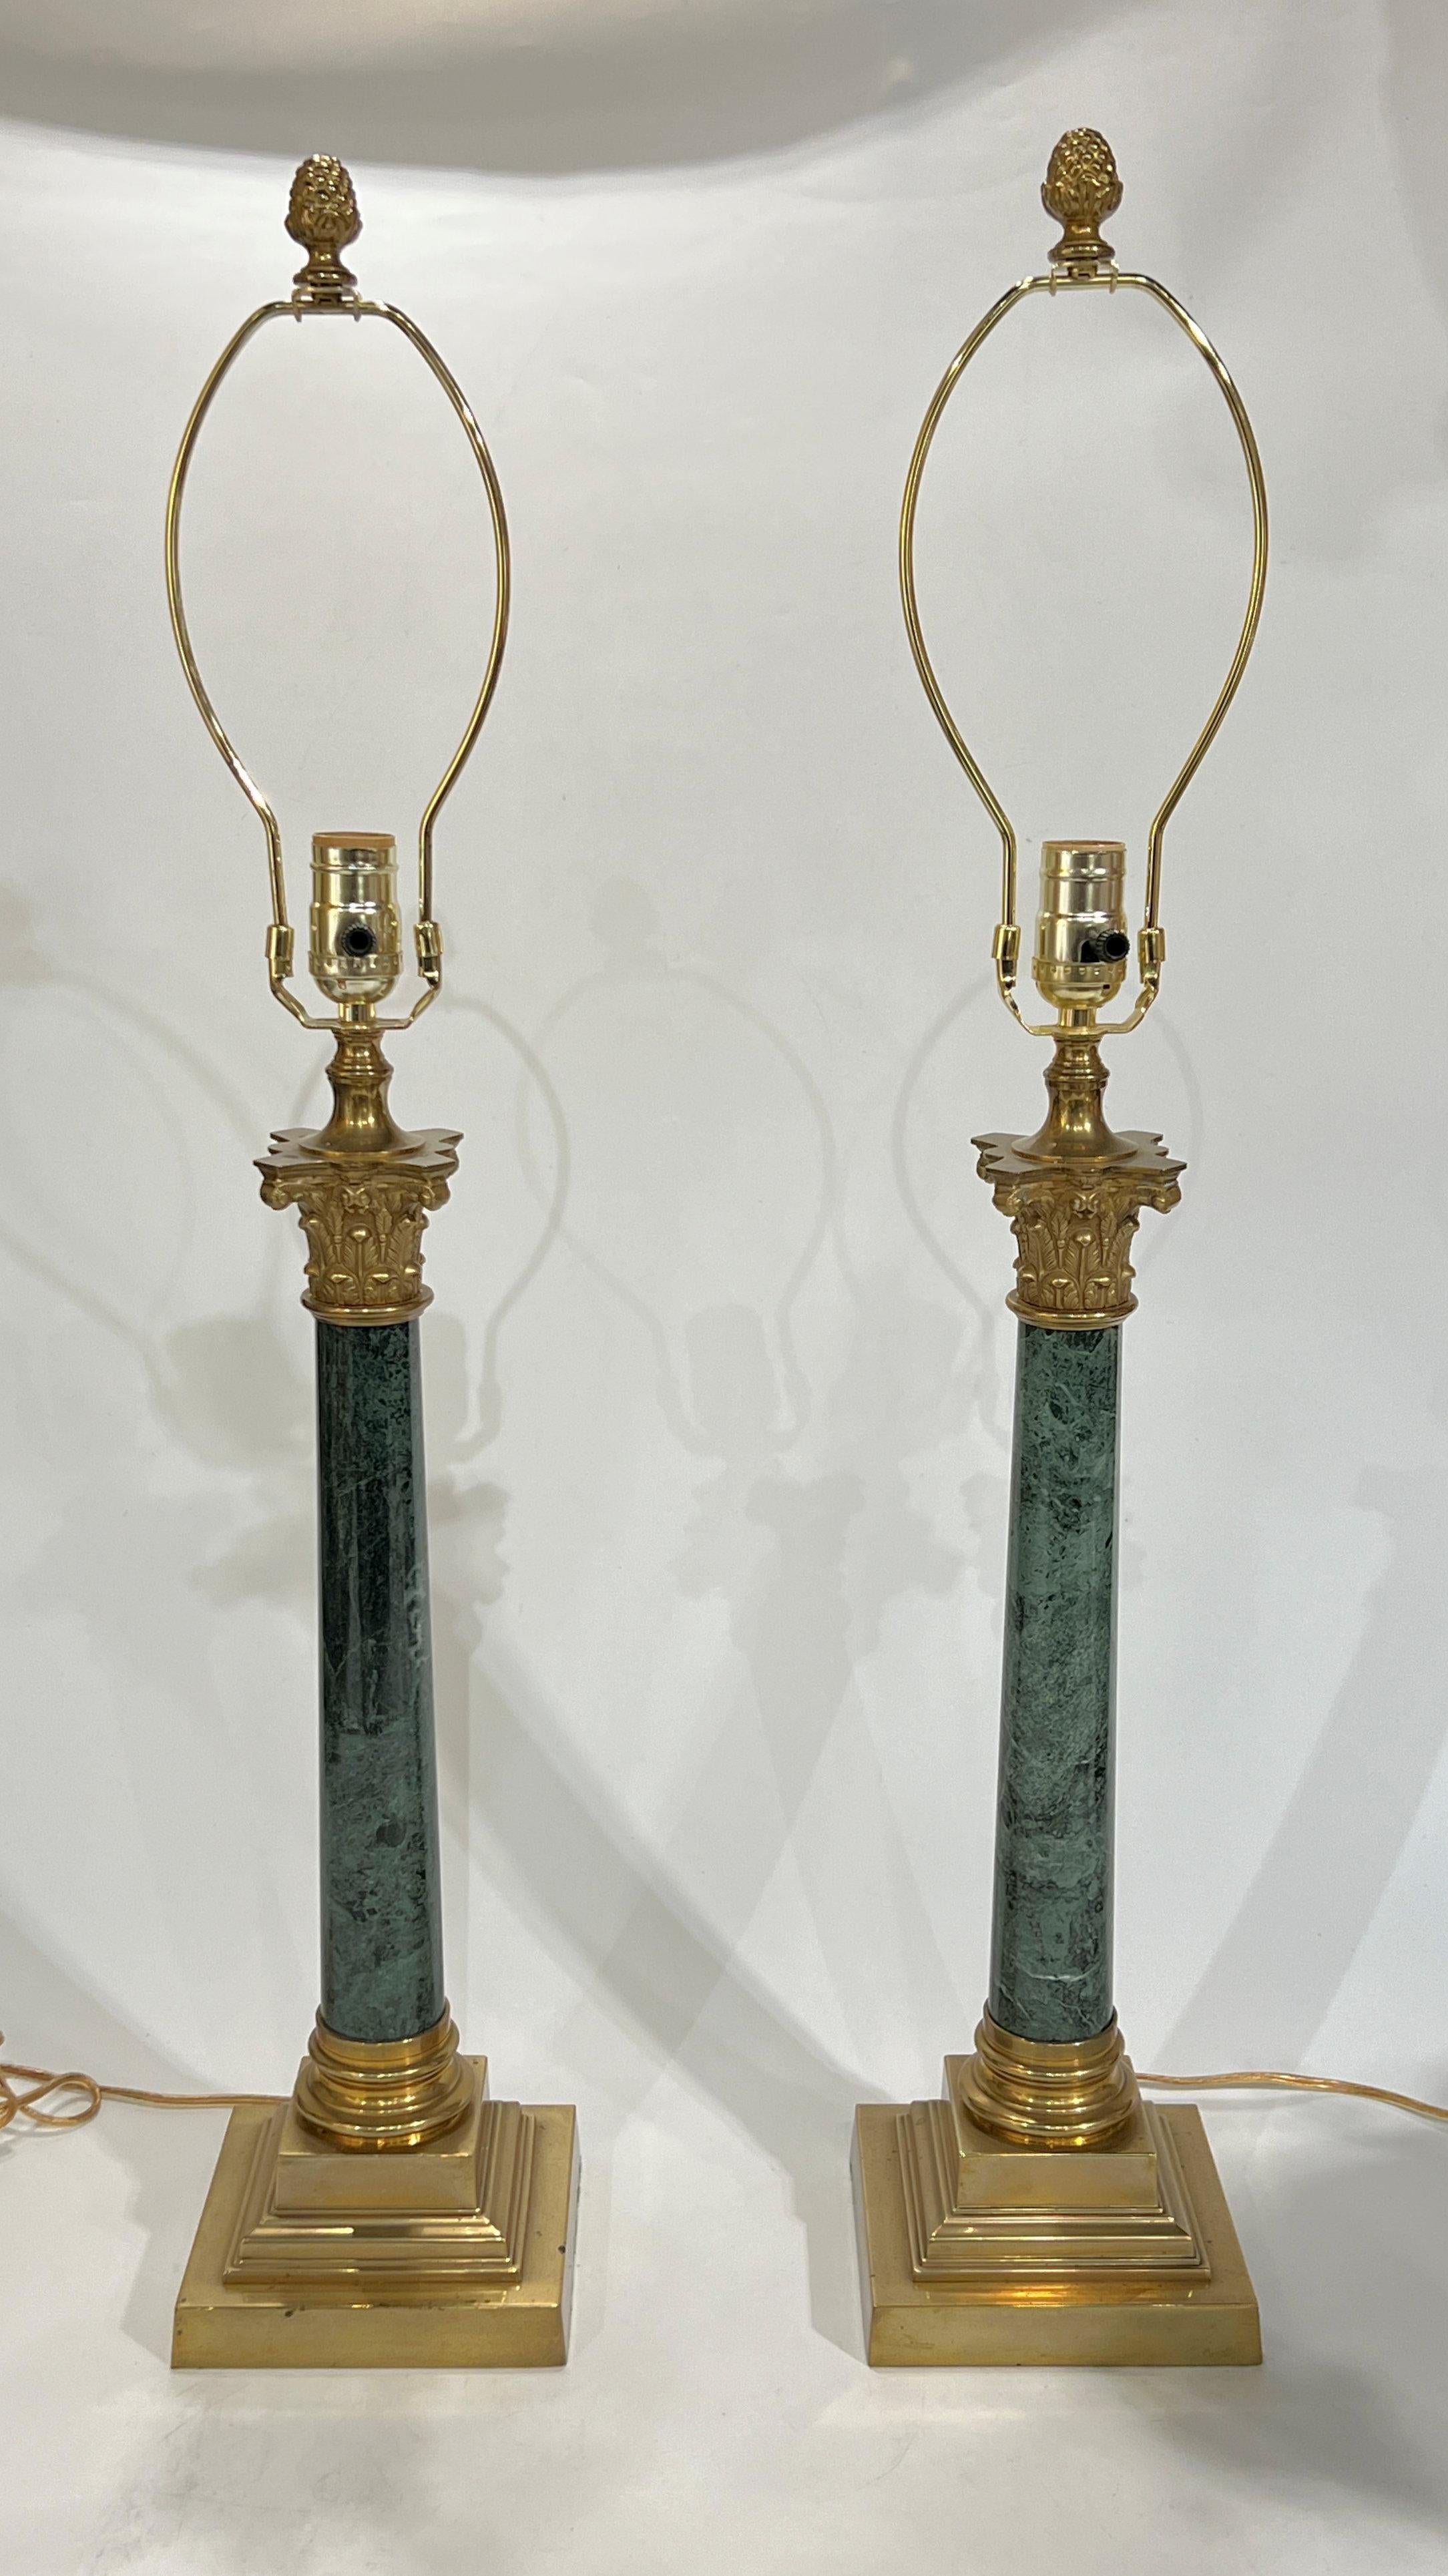 Pair of vintage Empire style table lamps of Roman column form, finely crafted from variegated green marble with brass mounts including Corinthian style capitals and square stepped bases.  With cord and plug, ready for use.